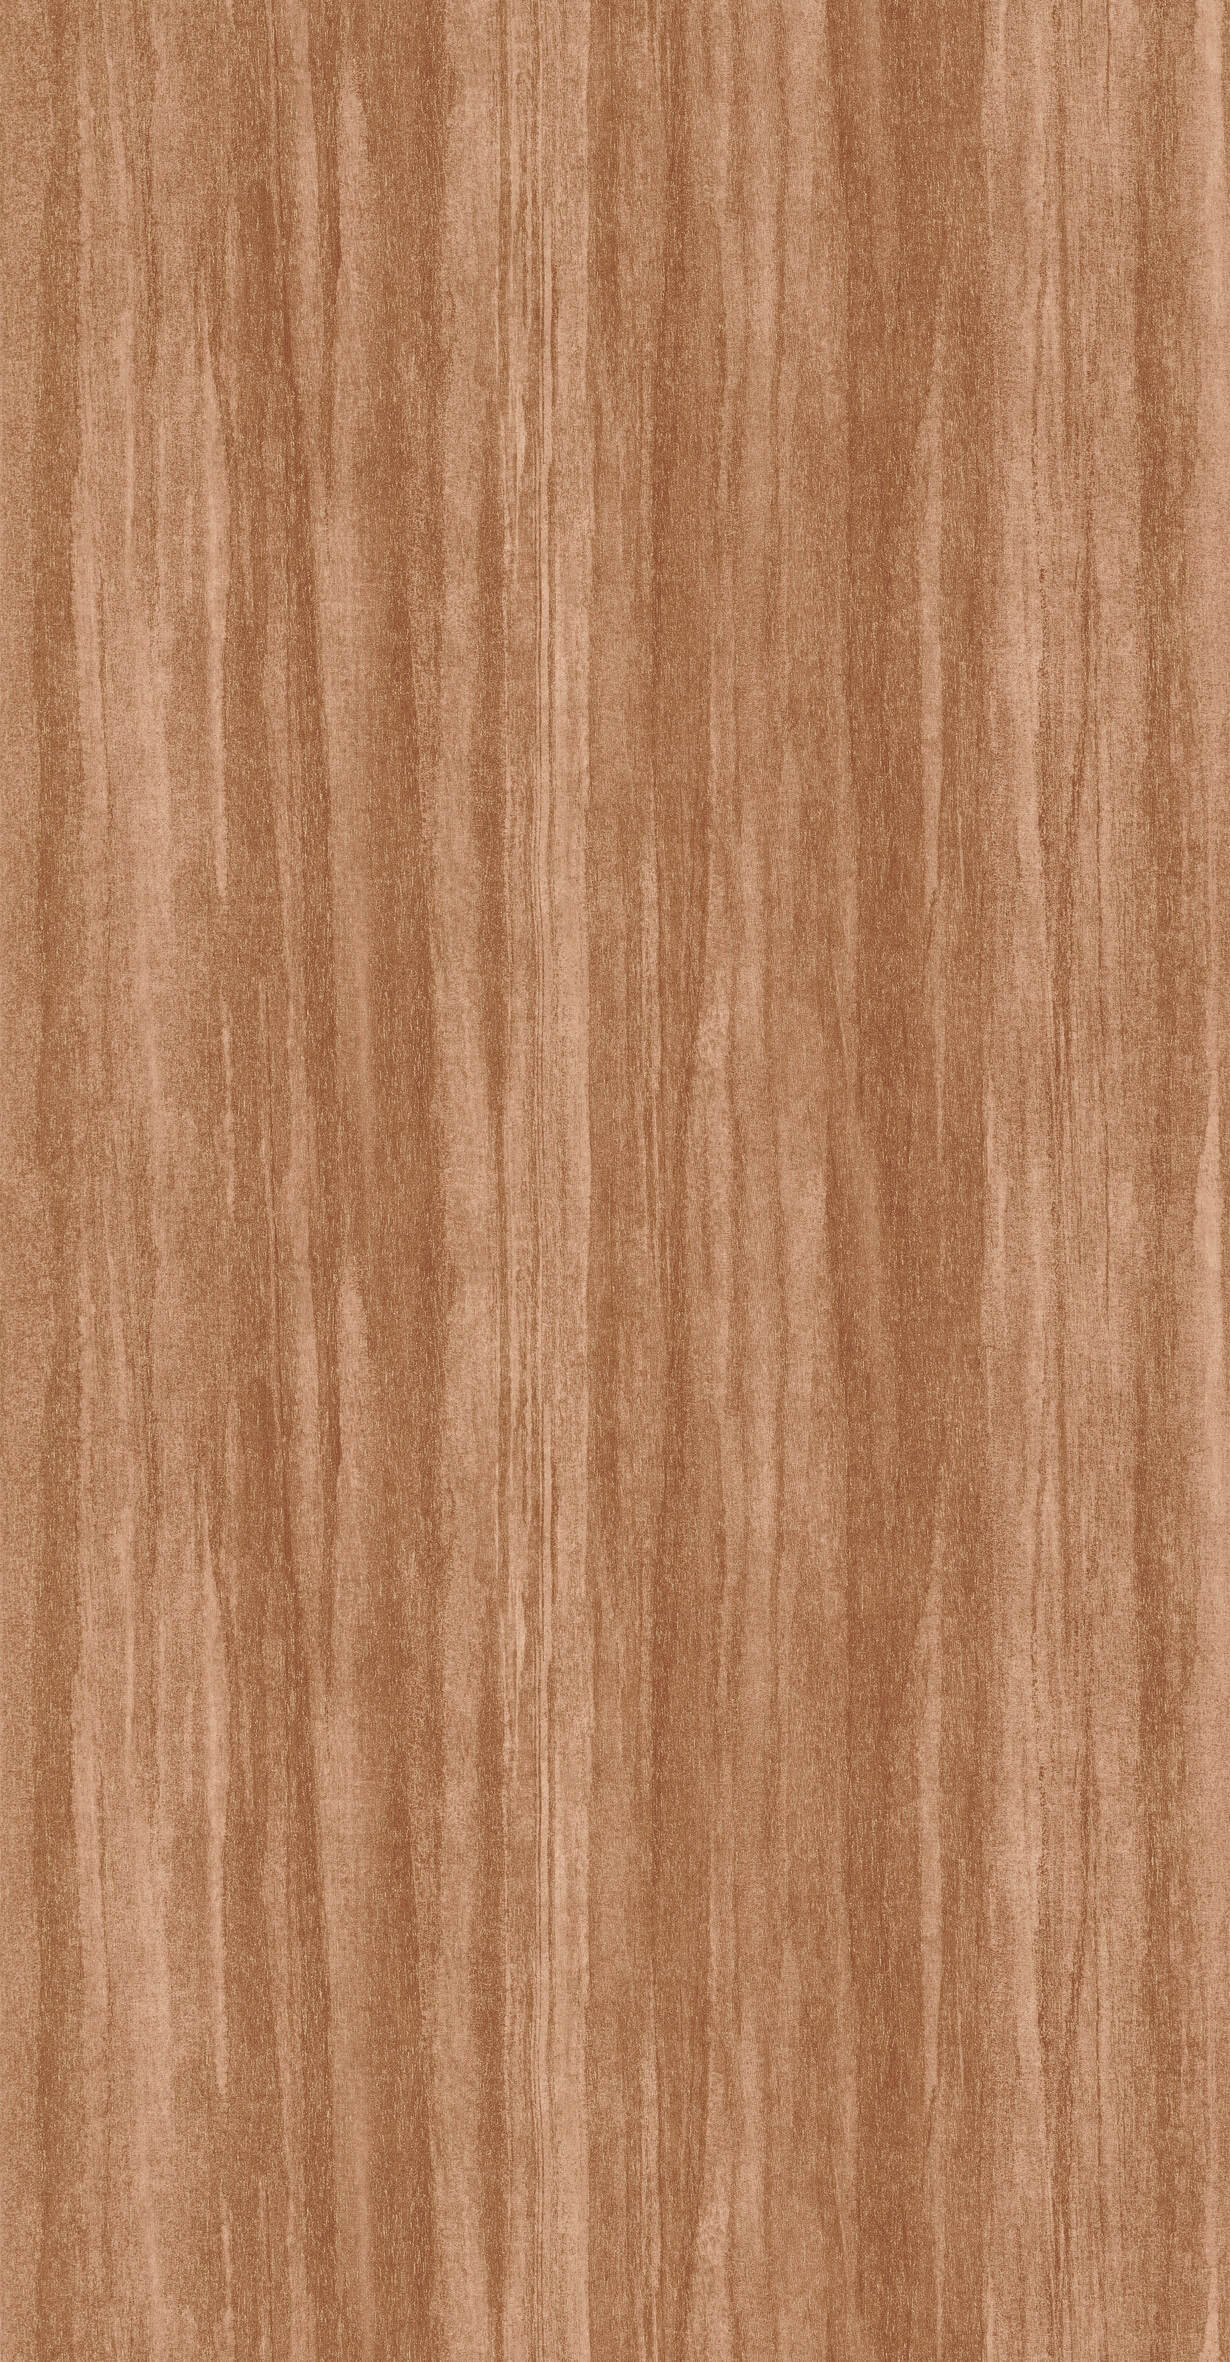 VEELIKE Teak Wood Wallpaper Peel and Stick Wood Grain Contact Paper Self  Adhesive Wood Texture Vinyl Wrap Waterproof Removable for Furniture  Cabinets Table Walls Covering Countertops 15.7''x354'' - Amazon.com